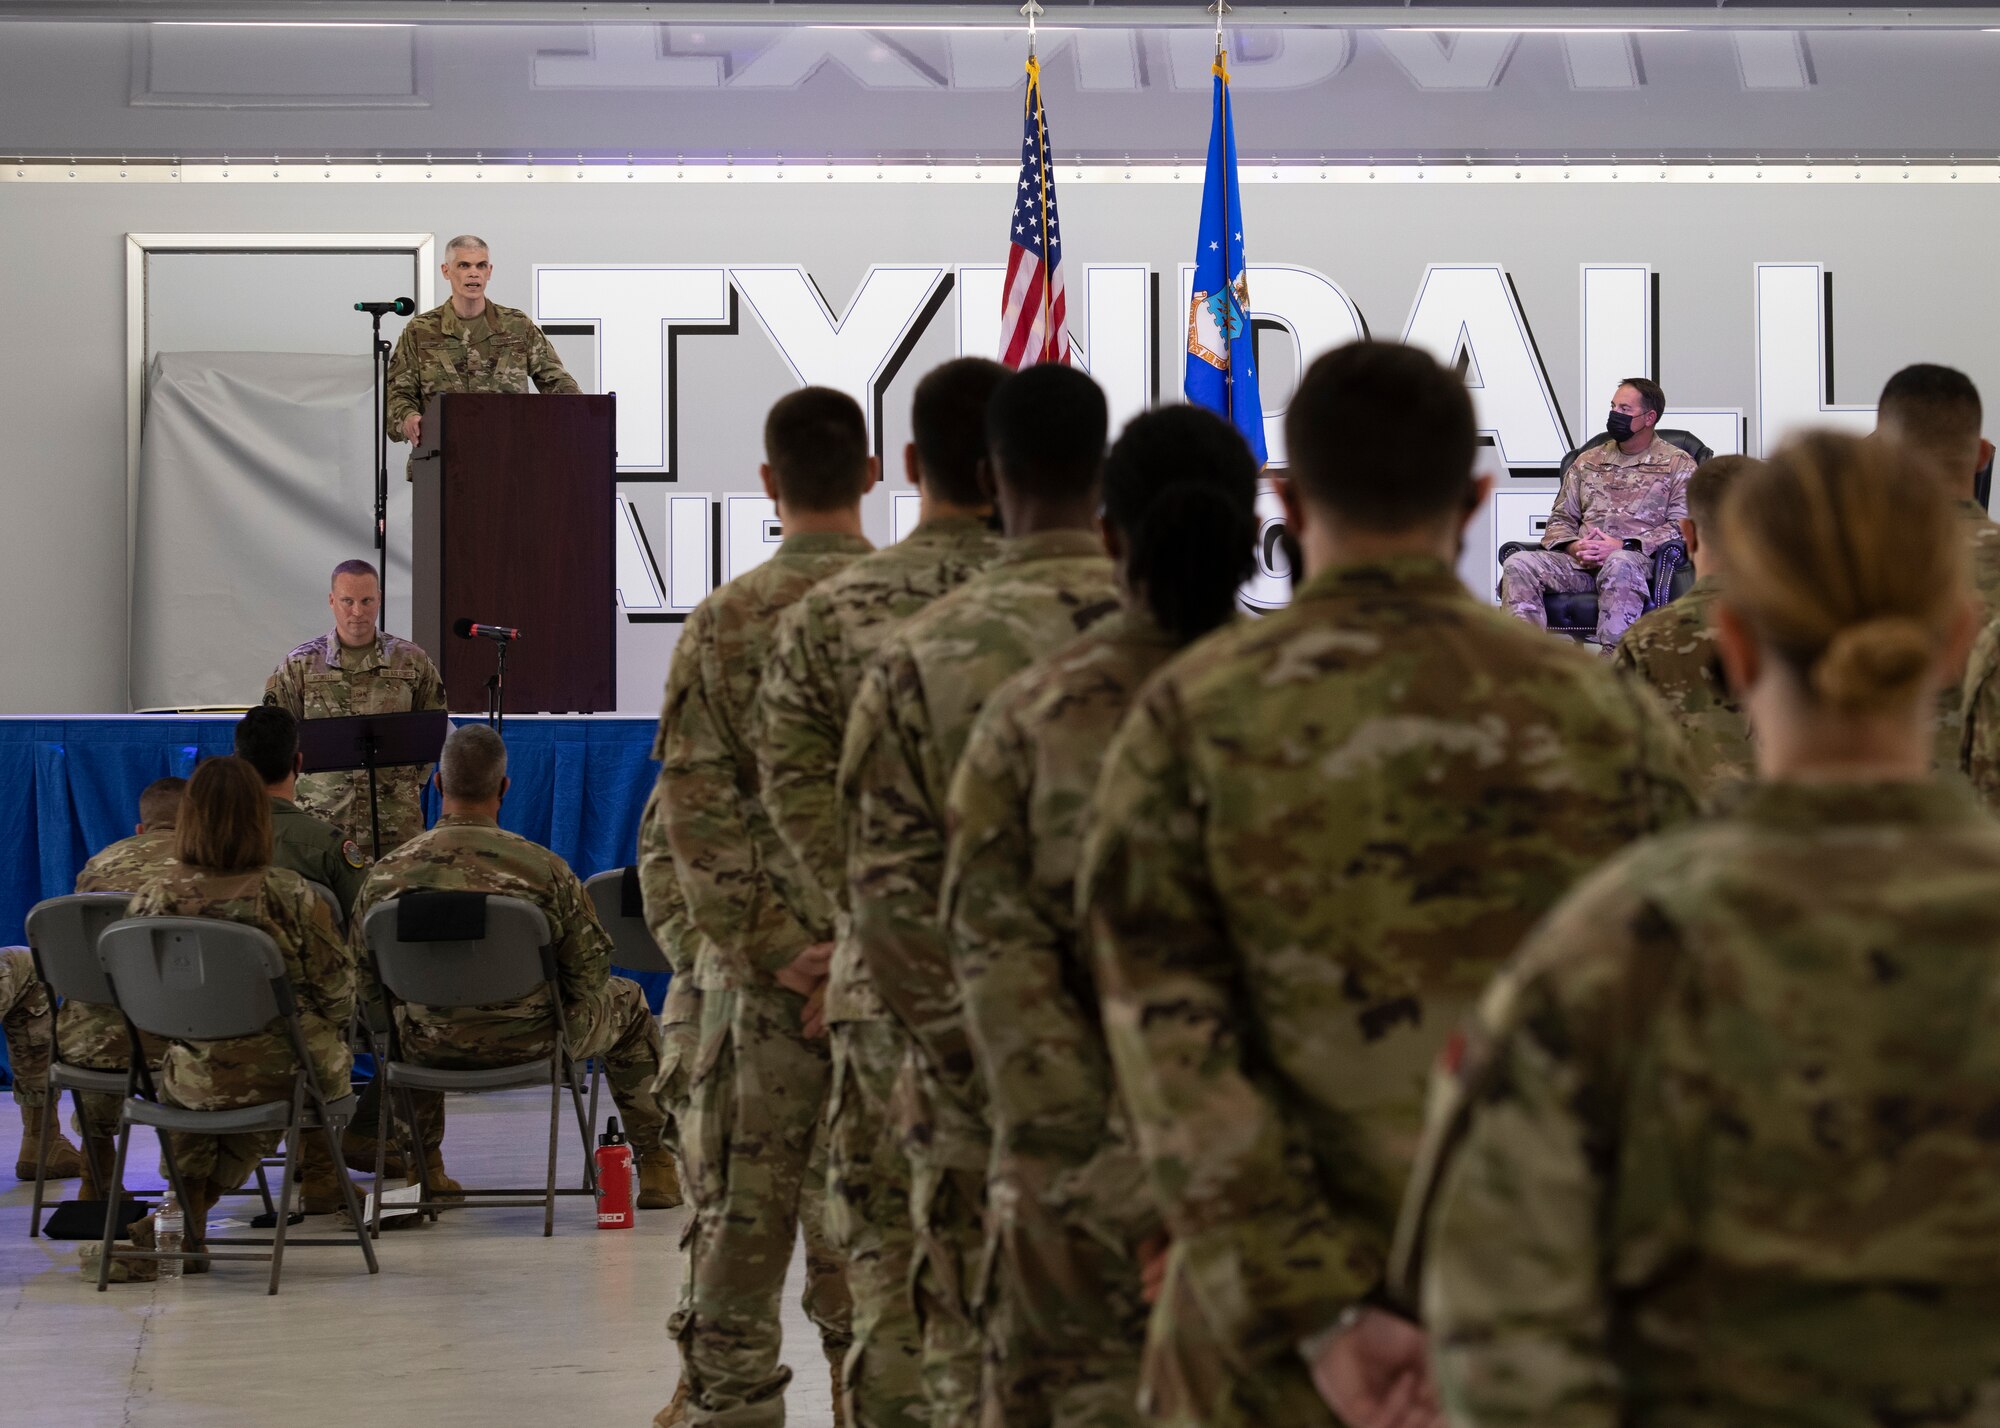 U.S. Air Force Col. Steven Collen, 325th Maintenance Group commander, addresses the group after assuming command at Tyndall Air Force Base, Florida, May 11, 2021.